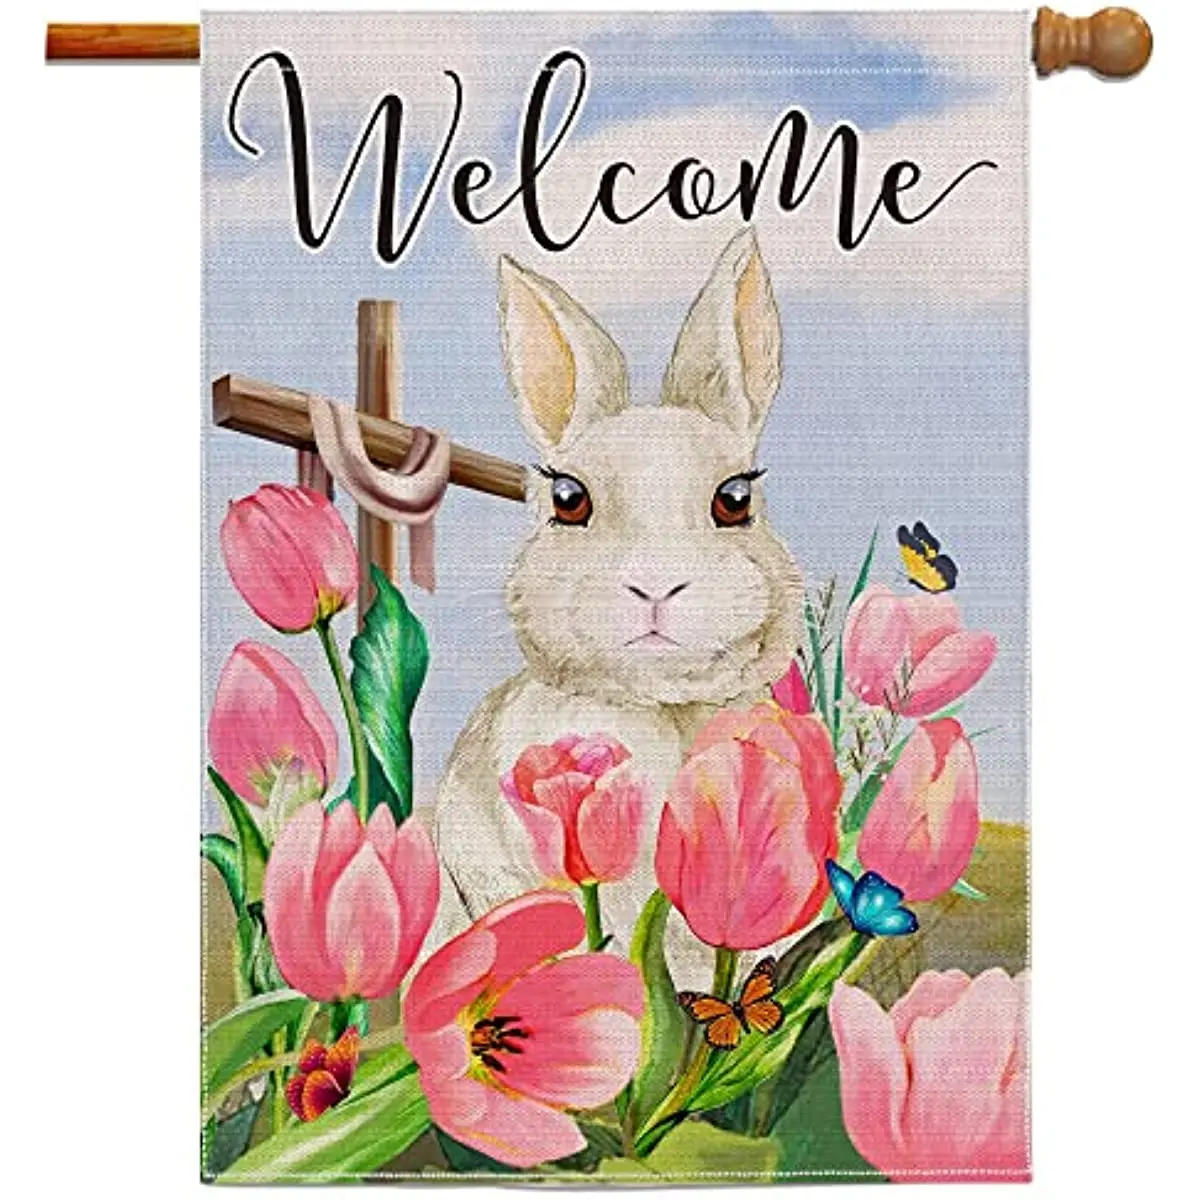 

New Easter Flags Bunny Welcome Large Easter Garden Flag, Spring Tulip Flowers Outdoor Decor for Yard Patio Lawn, Decorative